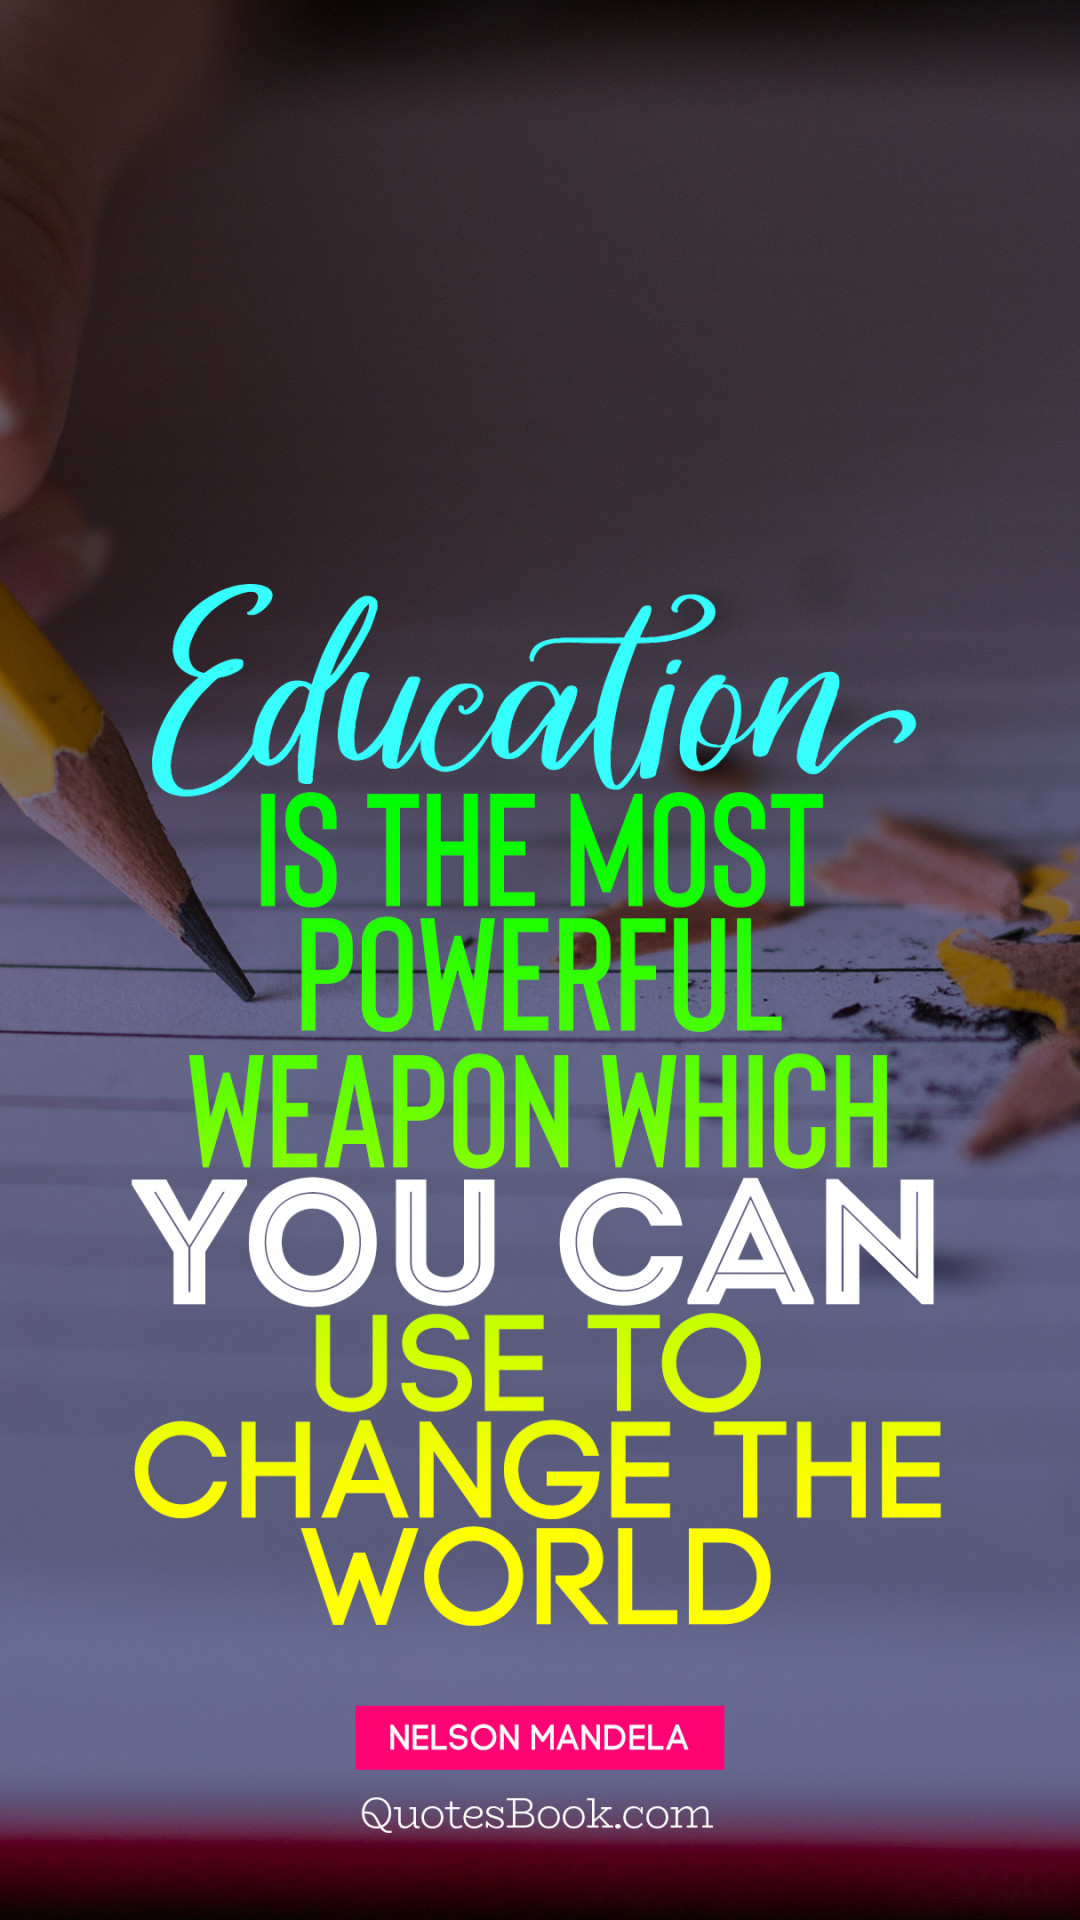 Education is the most powerful weapon which you can use to change the